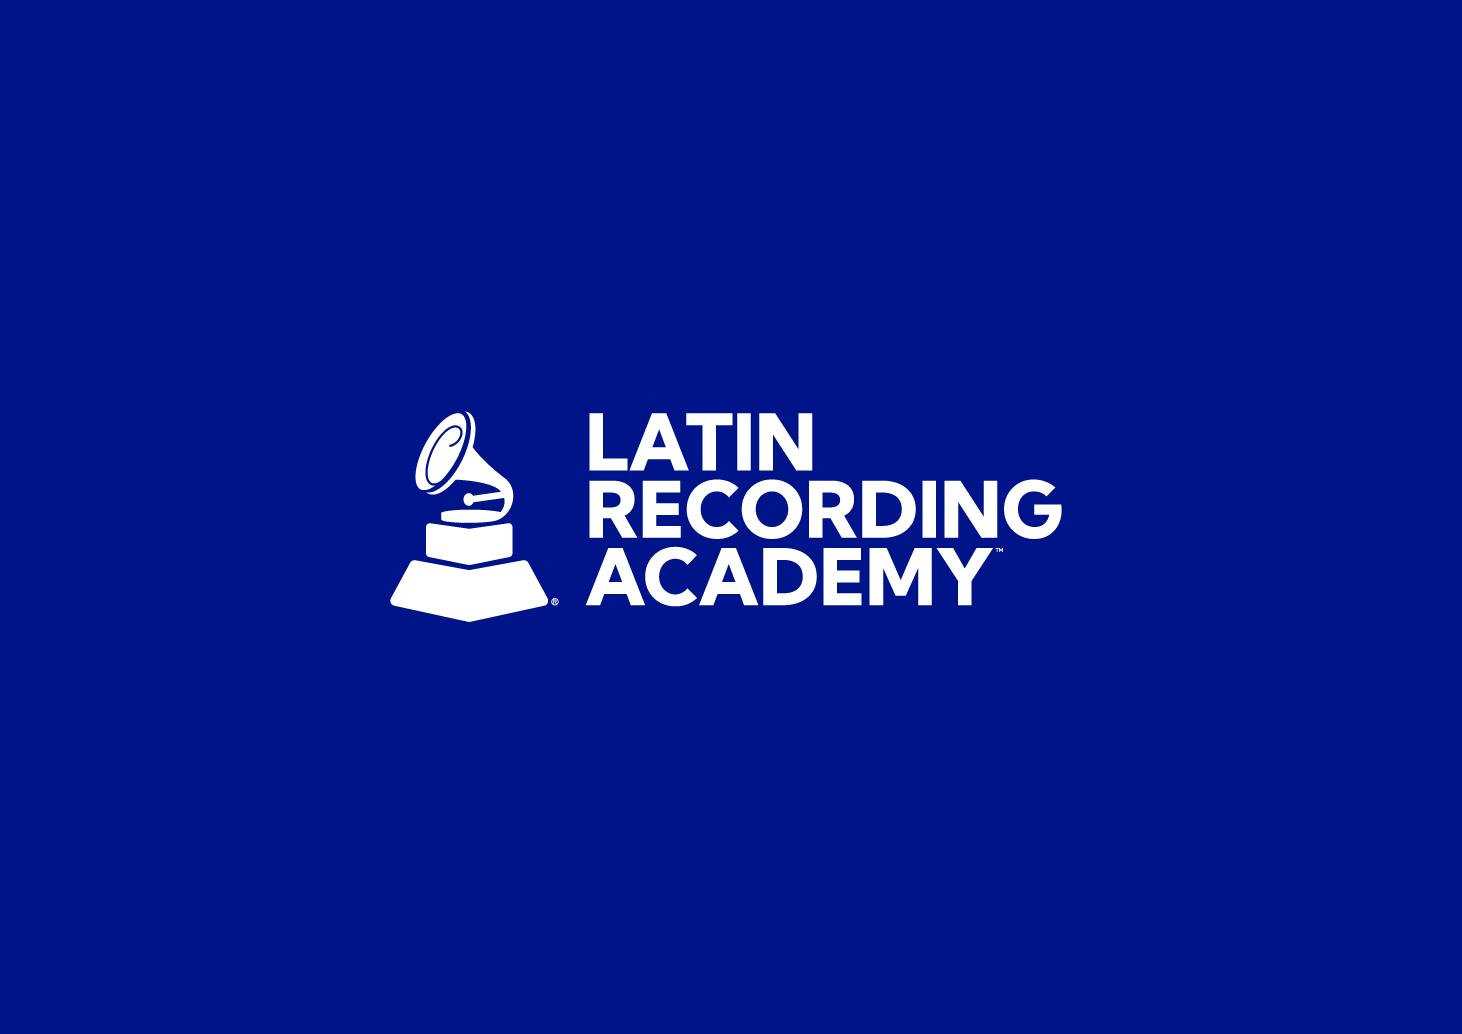 The logo for the Latin Recording Academy. The words "Latin Recording Academy" are written in white against a blue background with a logo of the Latin GRAMMY Award in white.